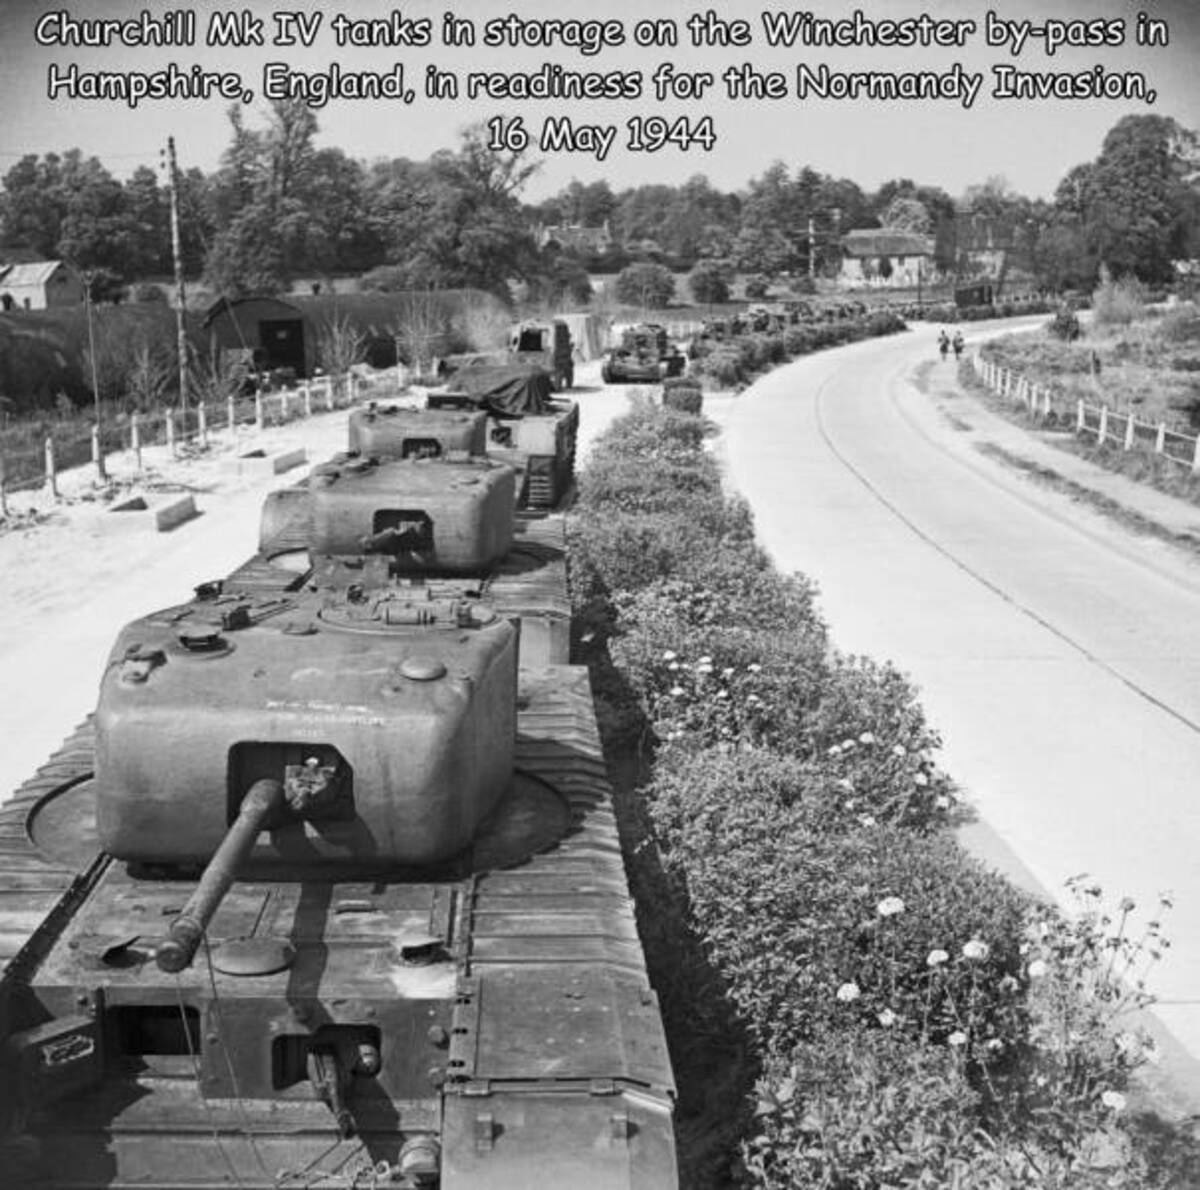 churchill mk iv 1944 - Churchill Mk Iv tanks in storage on the Winchester bypass in Hampshire, England, in readiness for the Normandy Invasion,